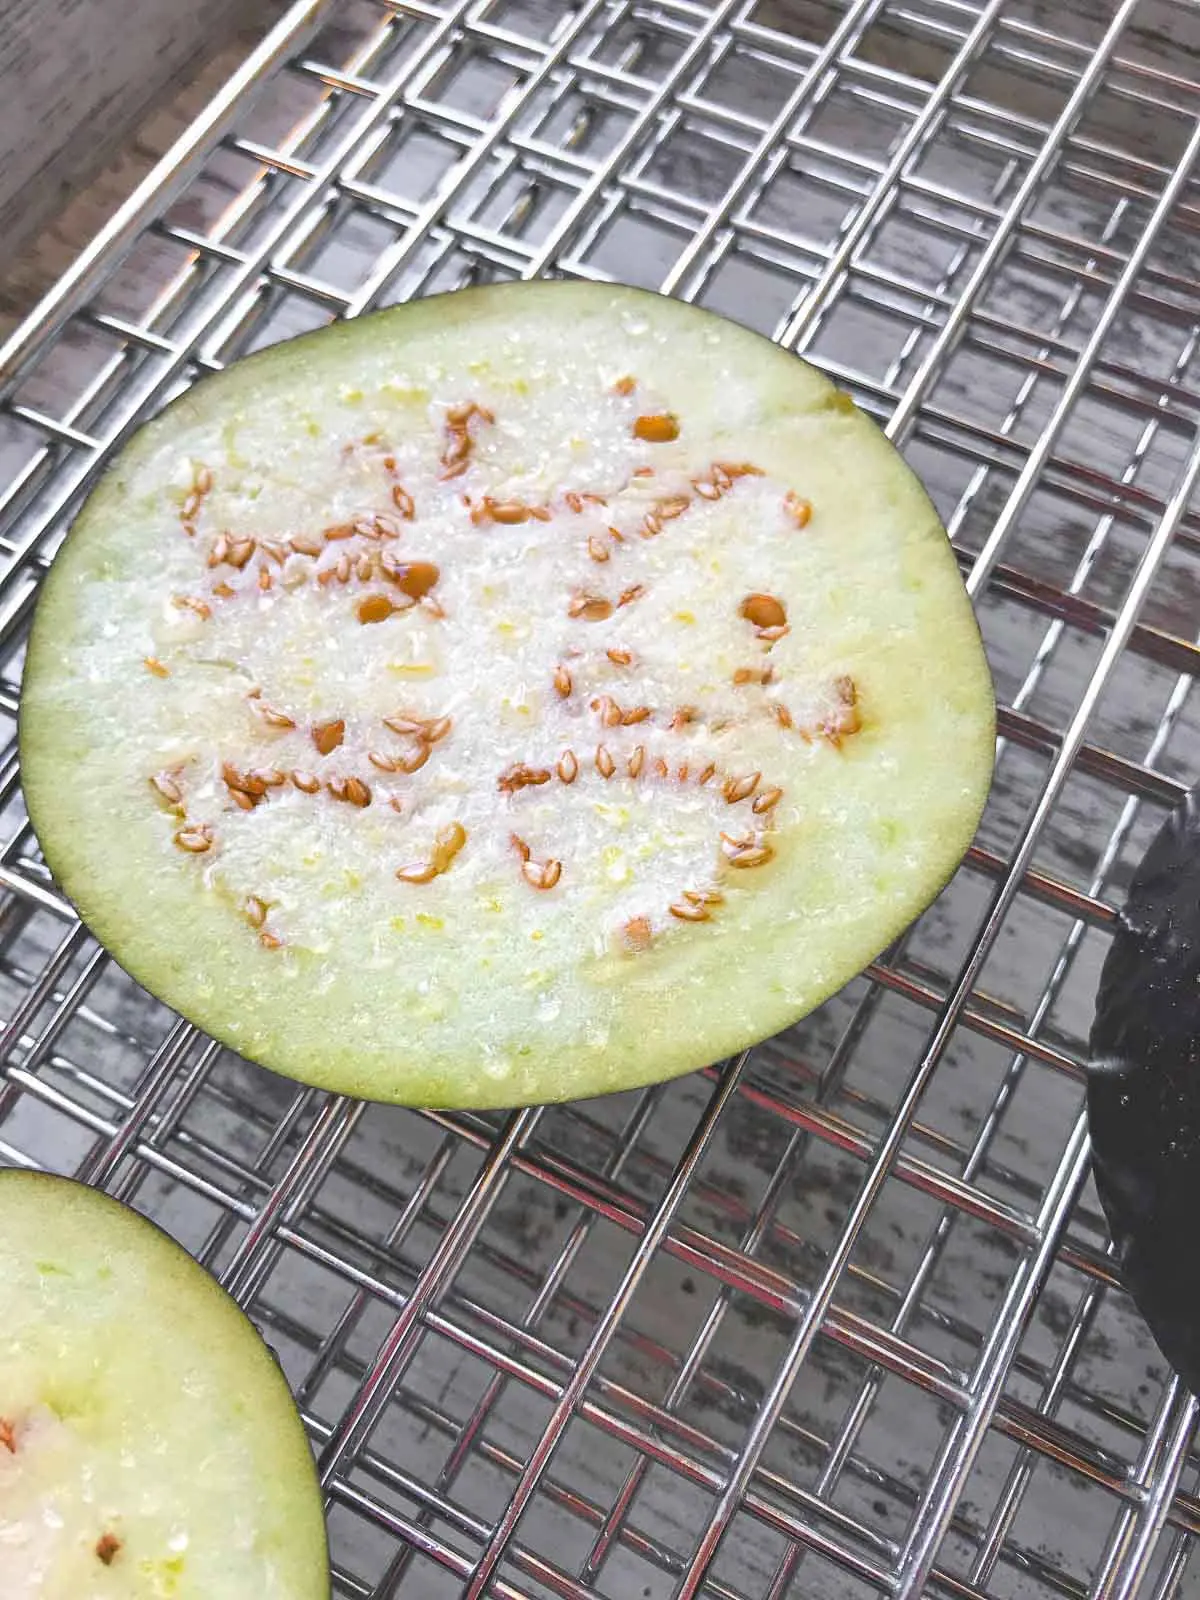 Eggplant with salt on it sweating on a cooking rack.